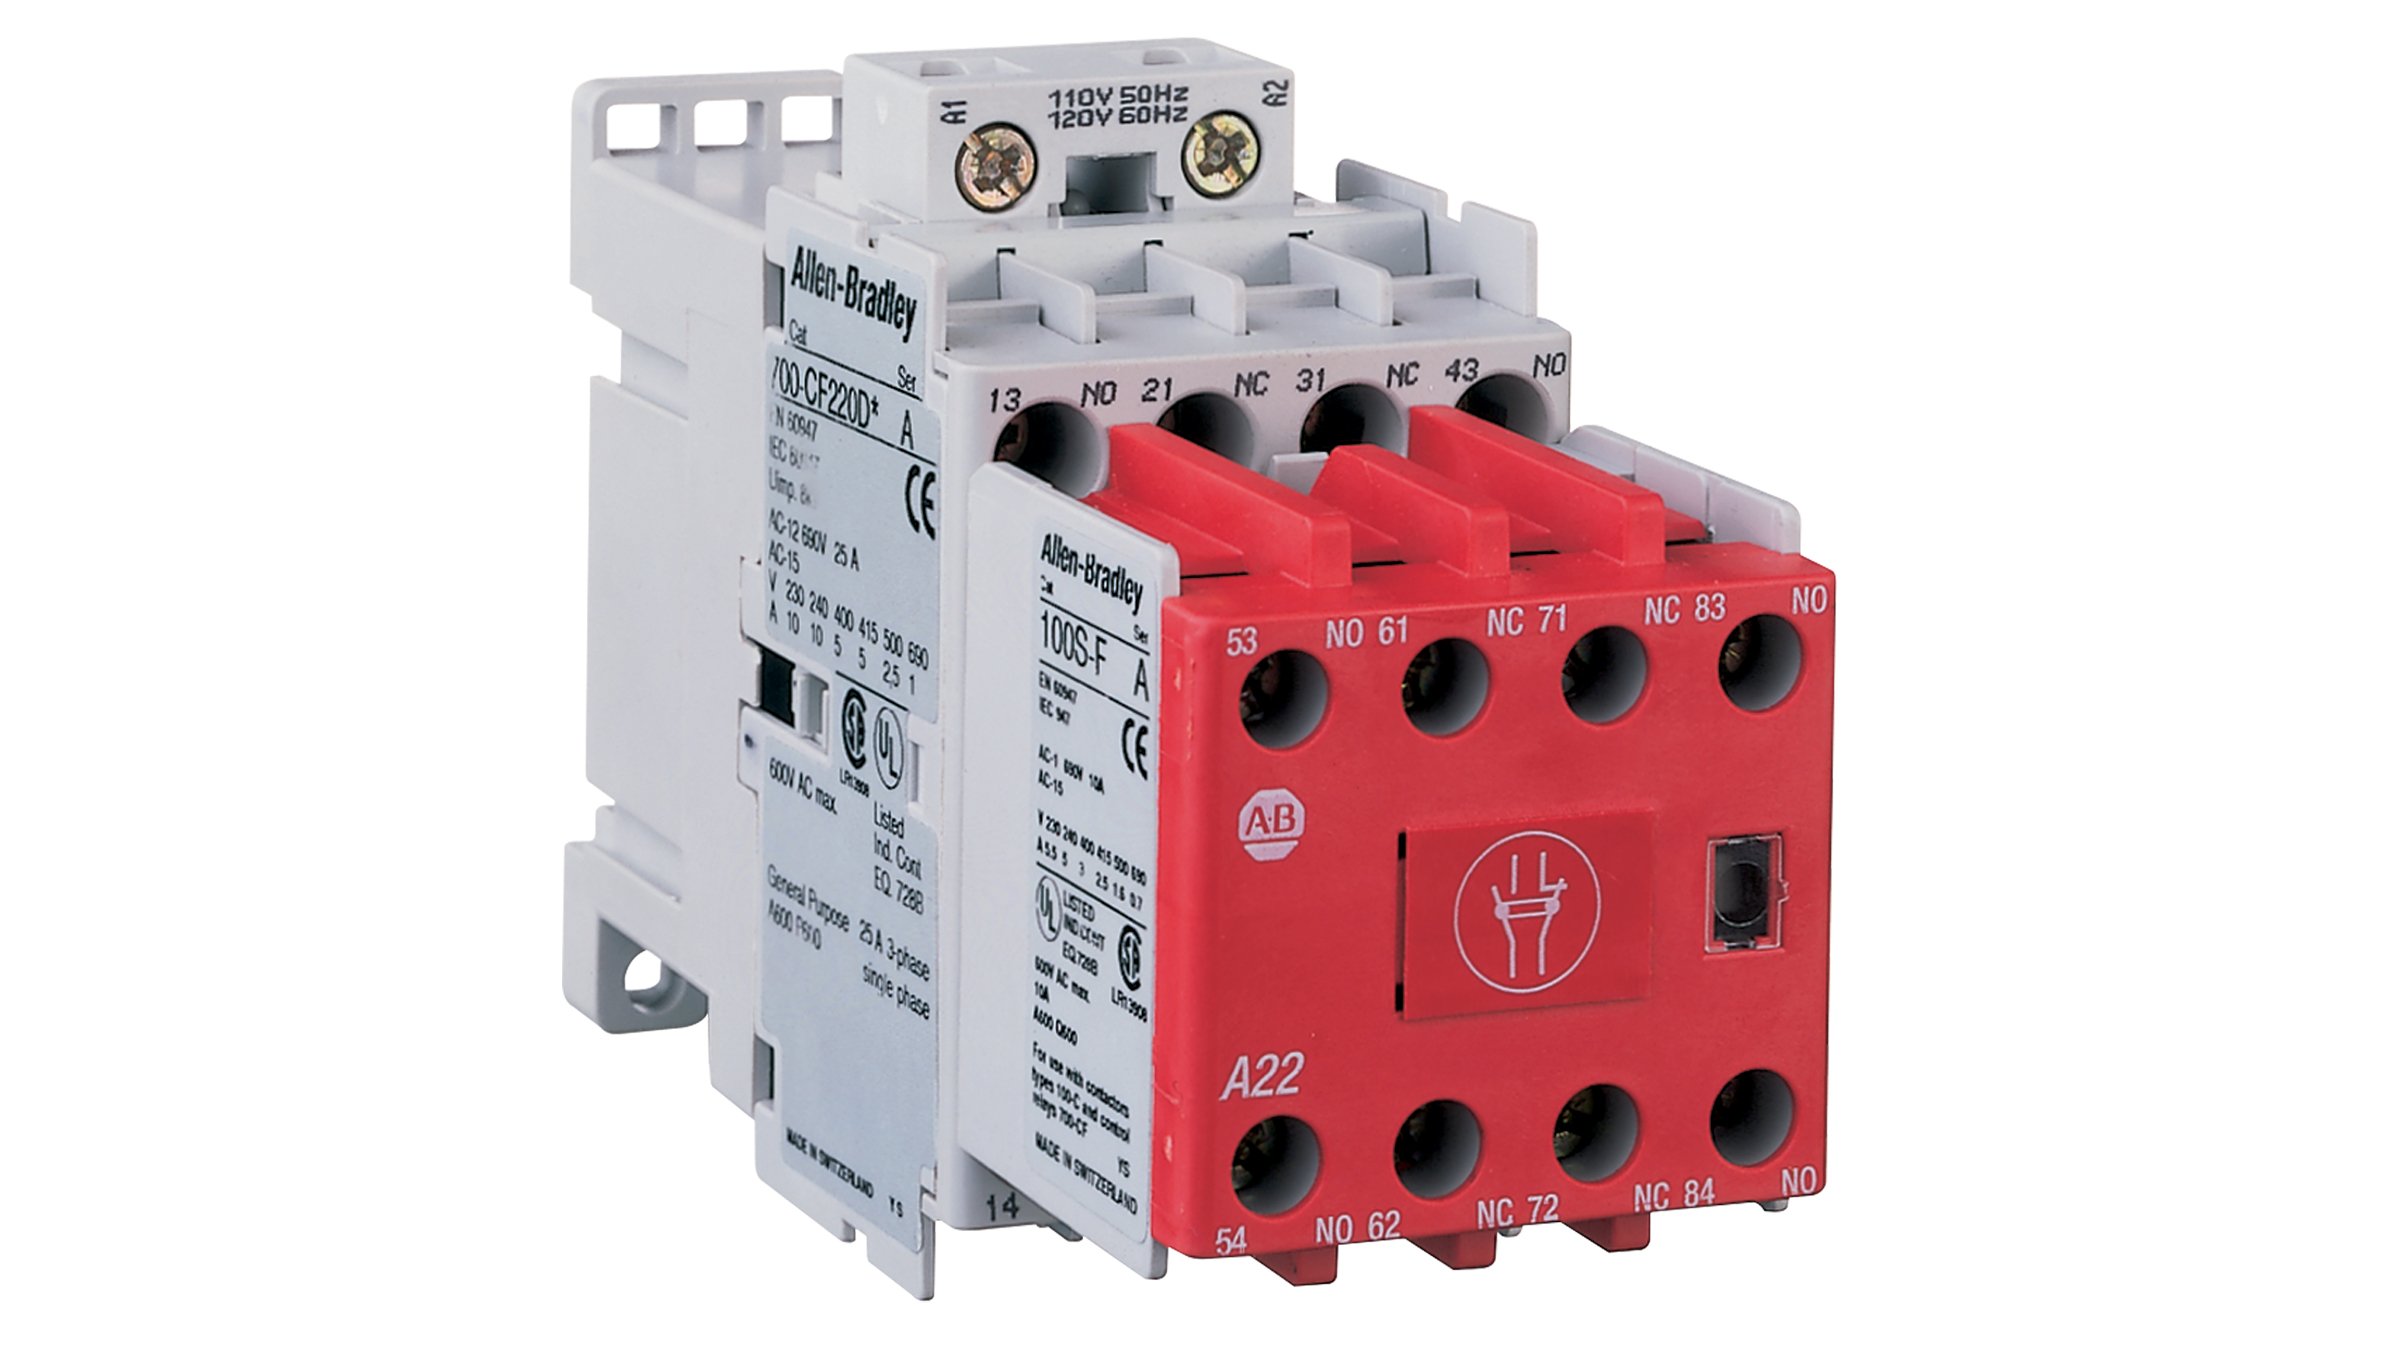 Allen-Bradley Bulletin 700S-CF IEC Safety Control Relays provide mechanically or mirror contact performance, which are required in feedback circuits for safety applications.